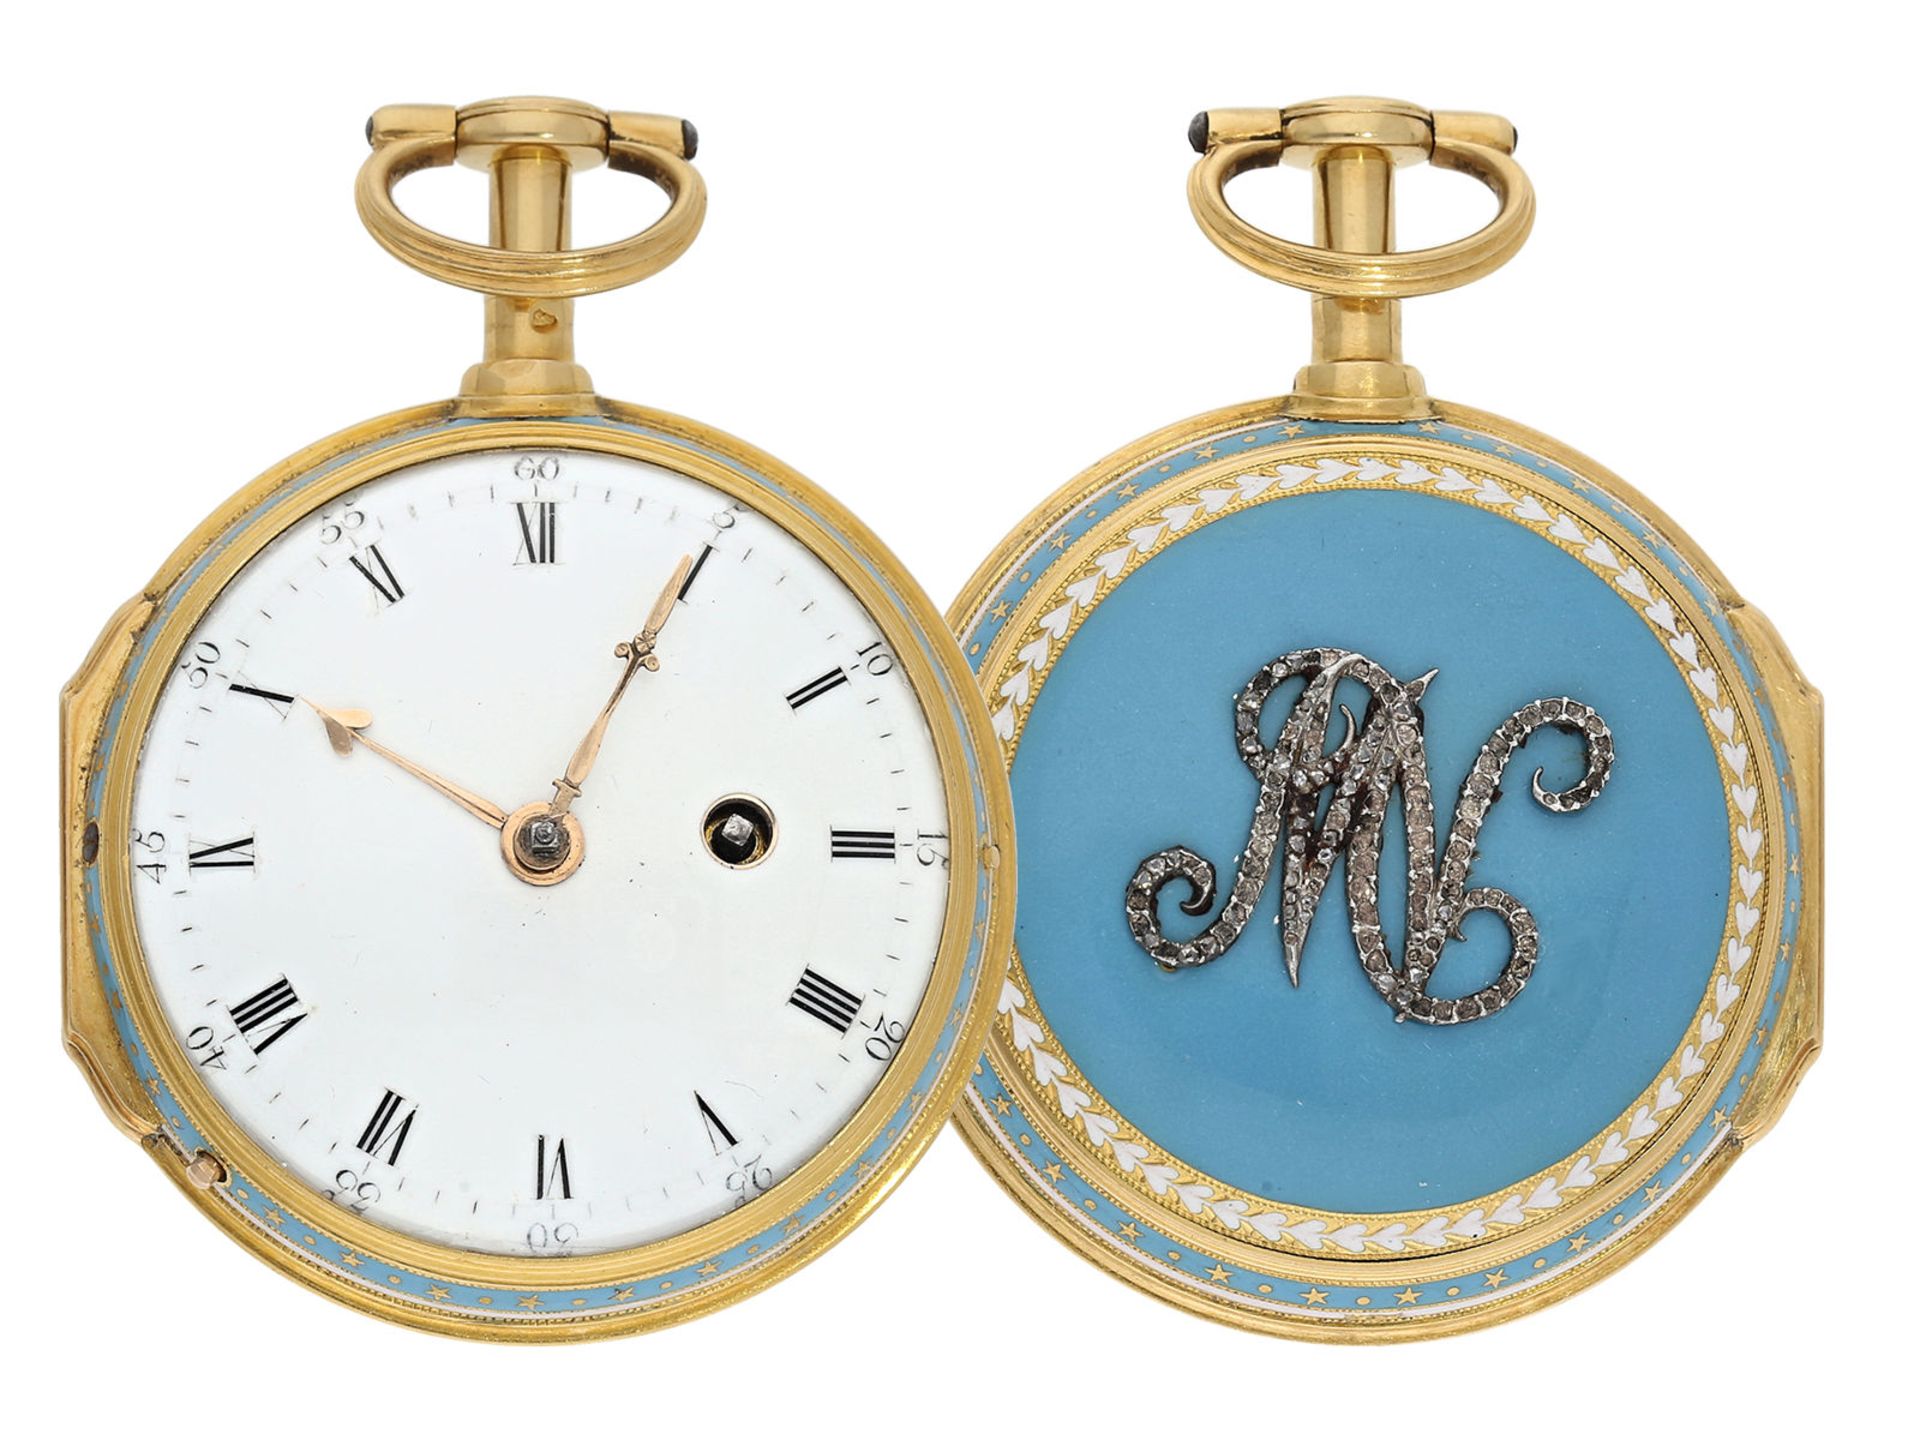 Pocket watch: exquisite gold/ enamel pocket watch with early cylinder escapement and diamond